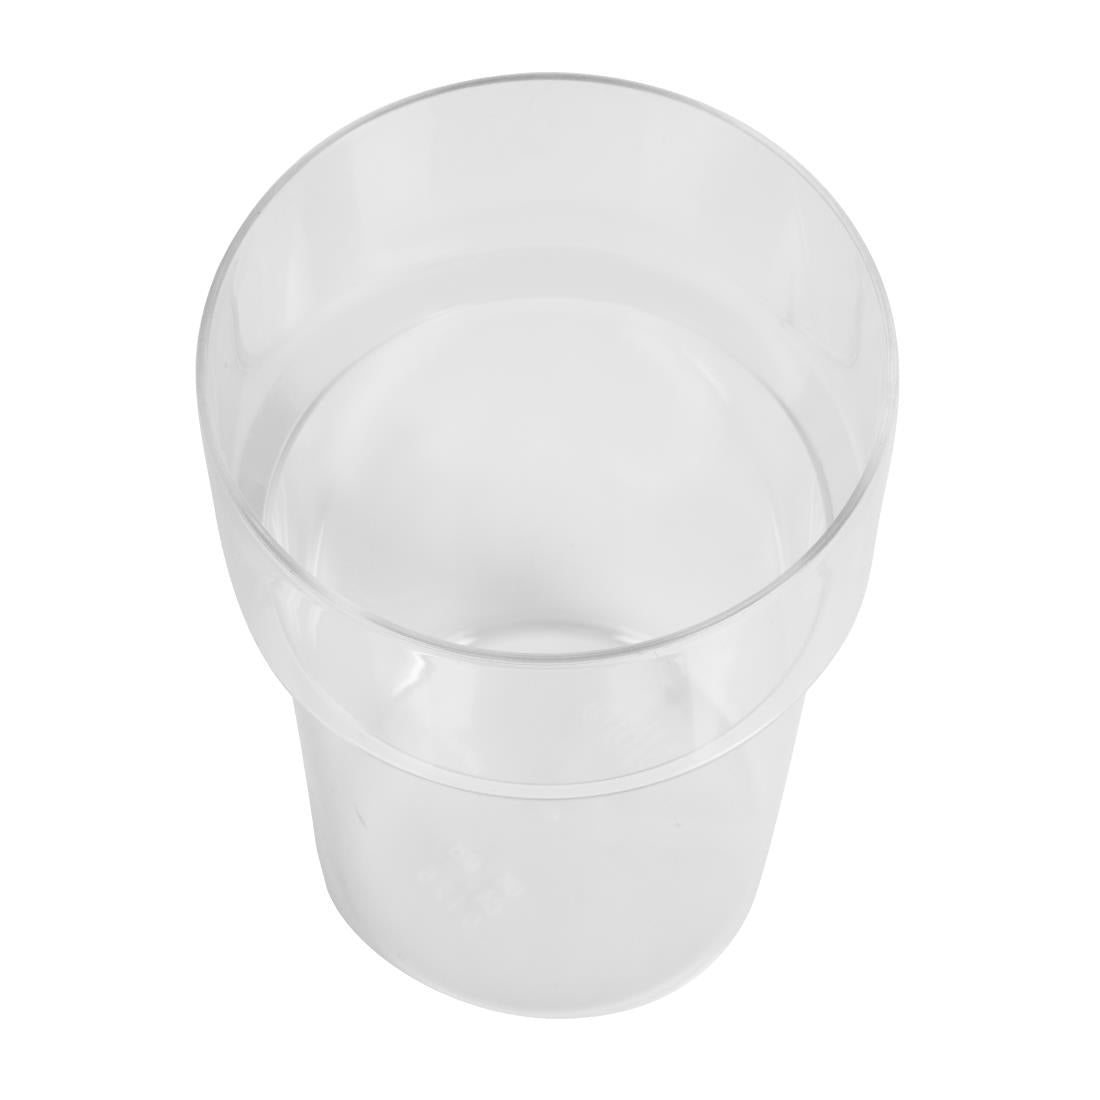 CB782 Polystyrene Tumblers 570ml CE Marked (Pack of 100) JD Catering Equipment Solutions Ltd